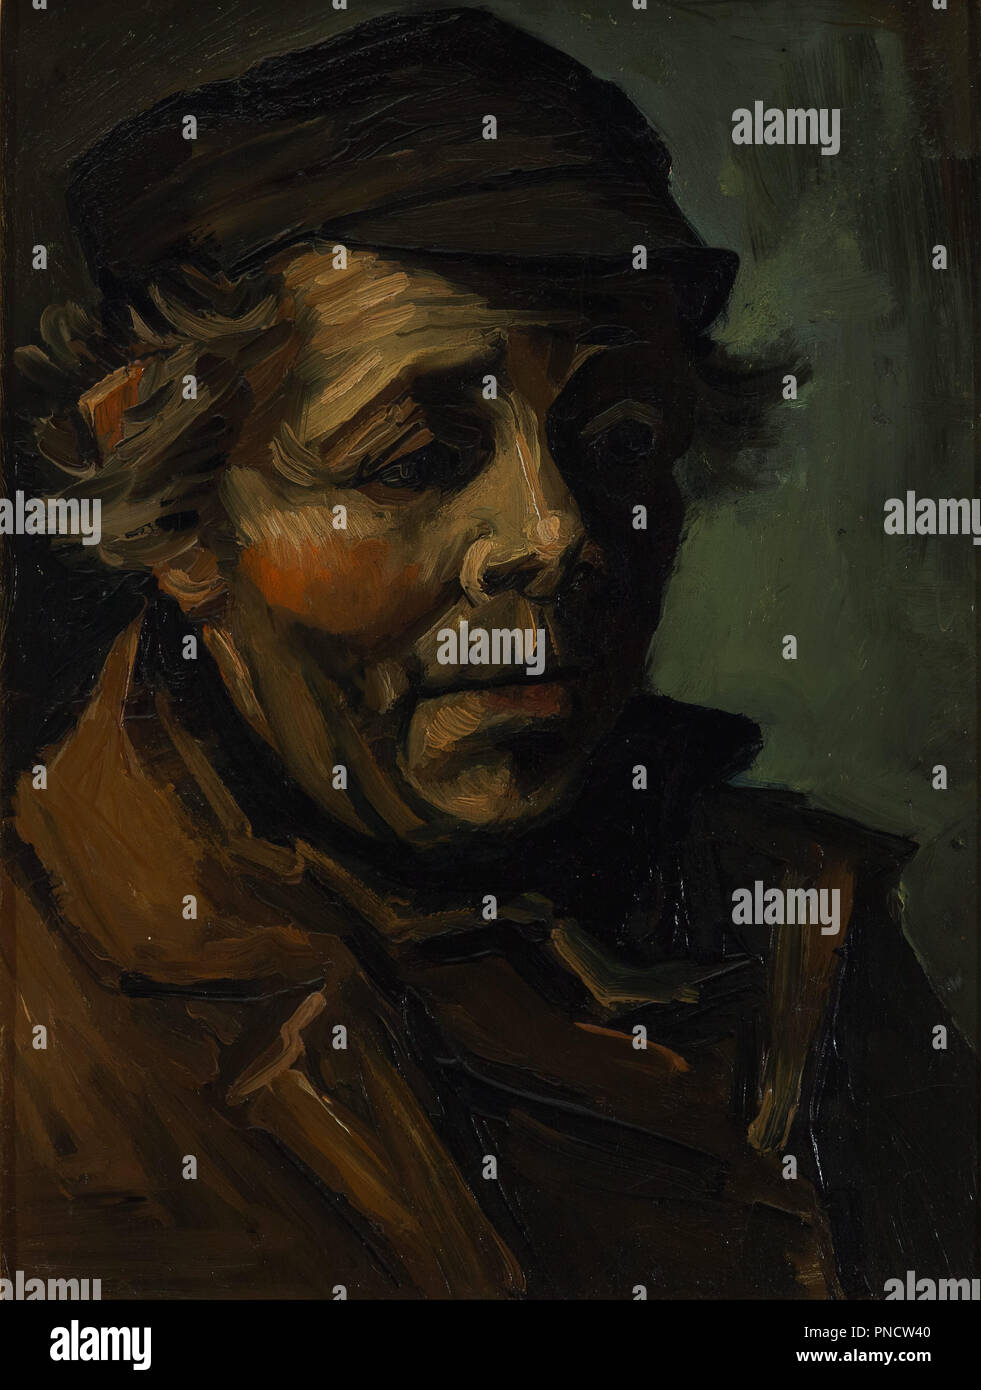 Head of a peasant withcap. Date/Period: Nuenen, December 1884. Painting. Oil on canvas. Height: 39.4 cm (15.5 in); Width: 30.2 cm (11.8 in). Author: VINCENT VAN GOGH. VAN GOGH, VINCENT. Stock Photo